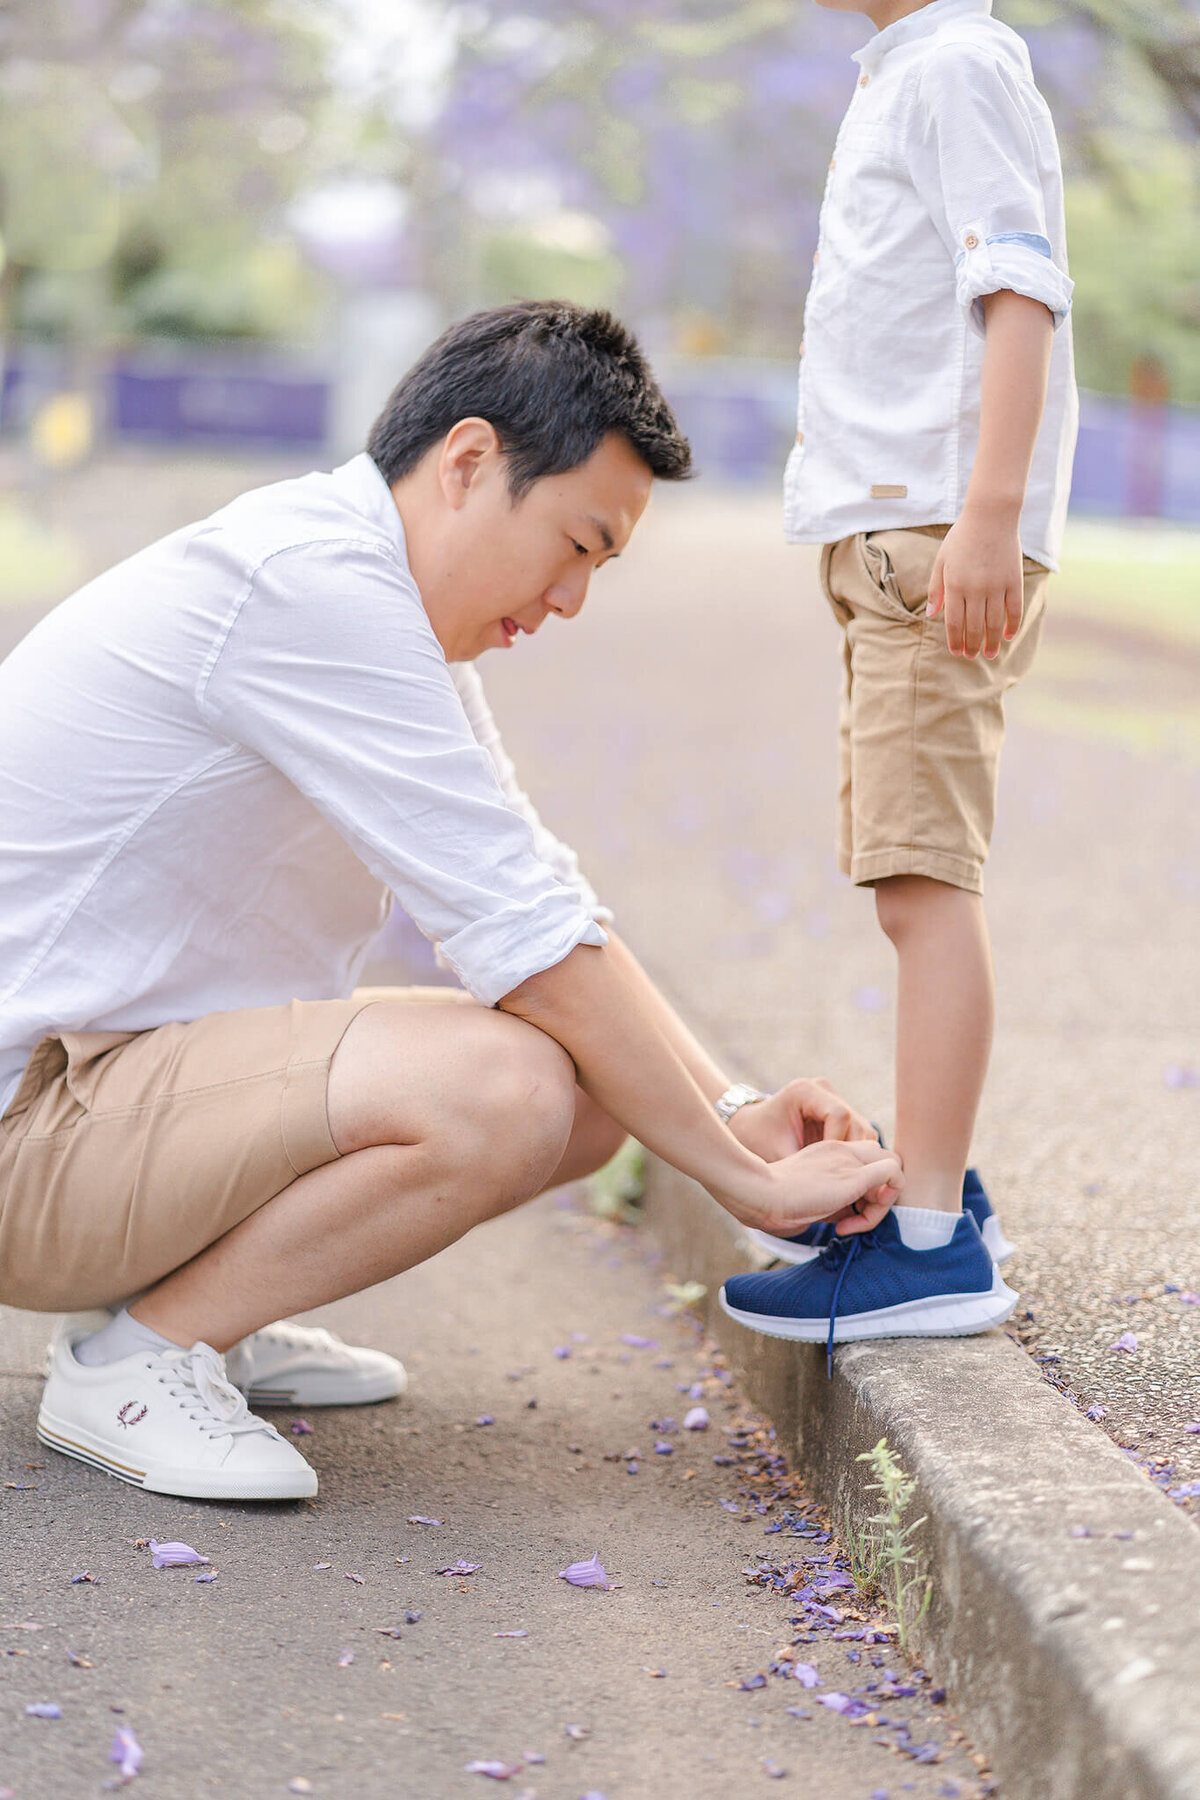 dad helping tie son's shoes in jacaranda blossoms sweet candid moment